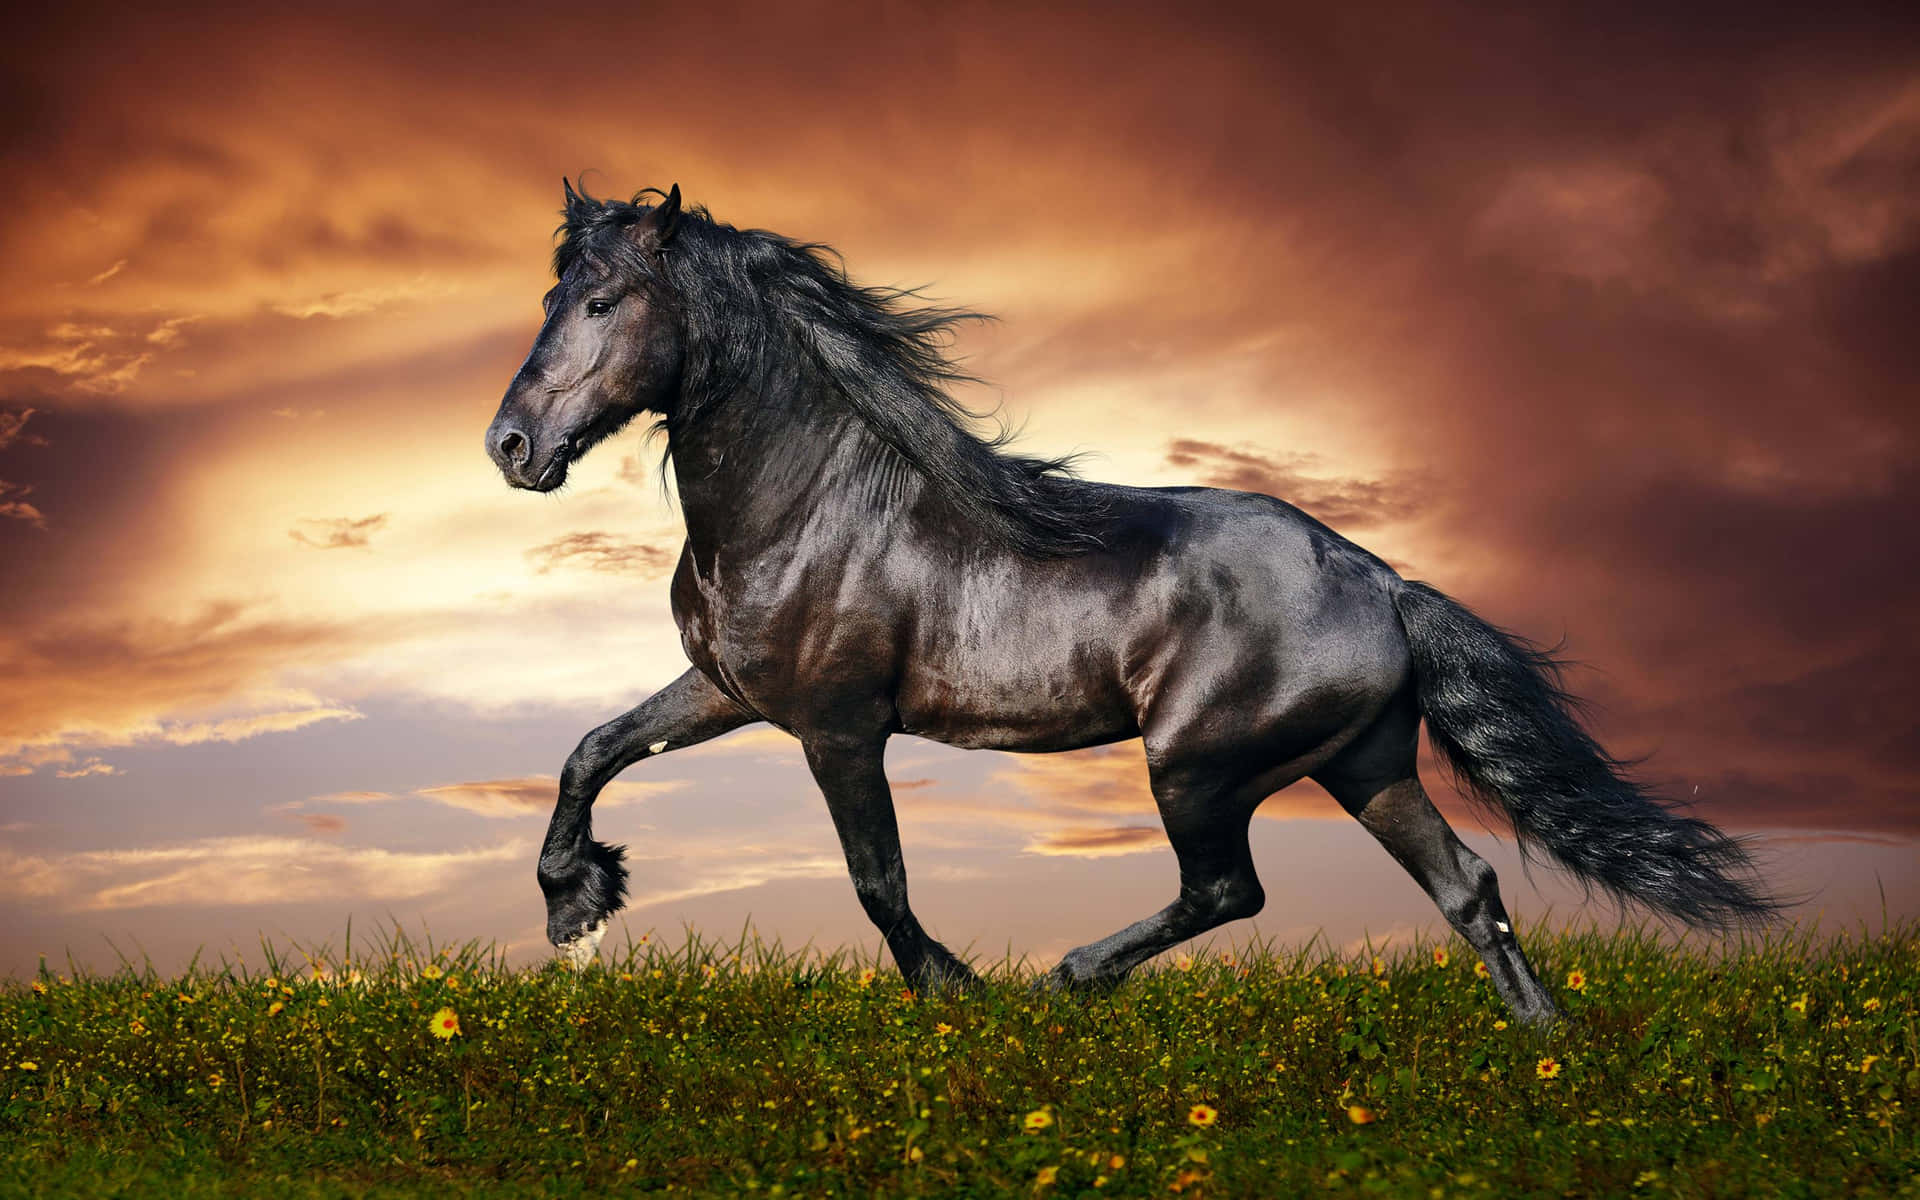 Majestic Beauty: Stunning Horse In Full Gallop